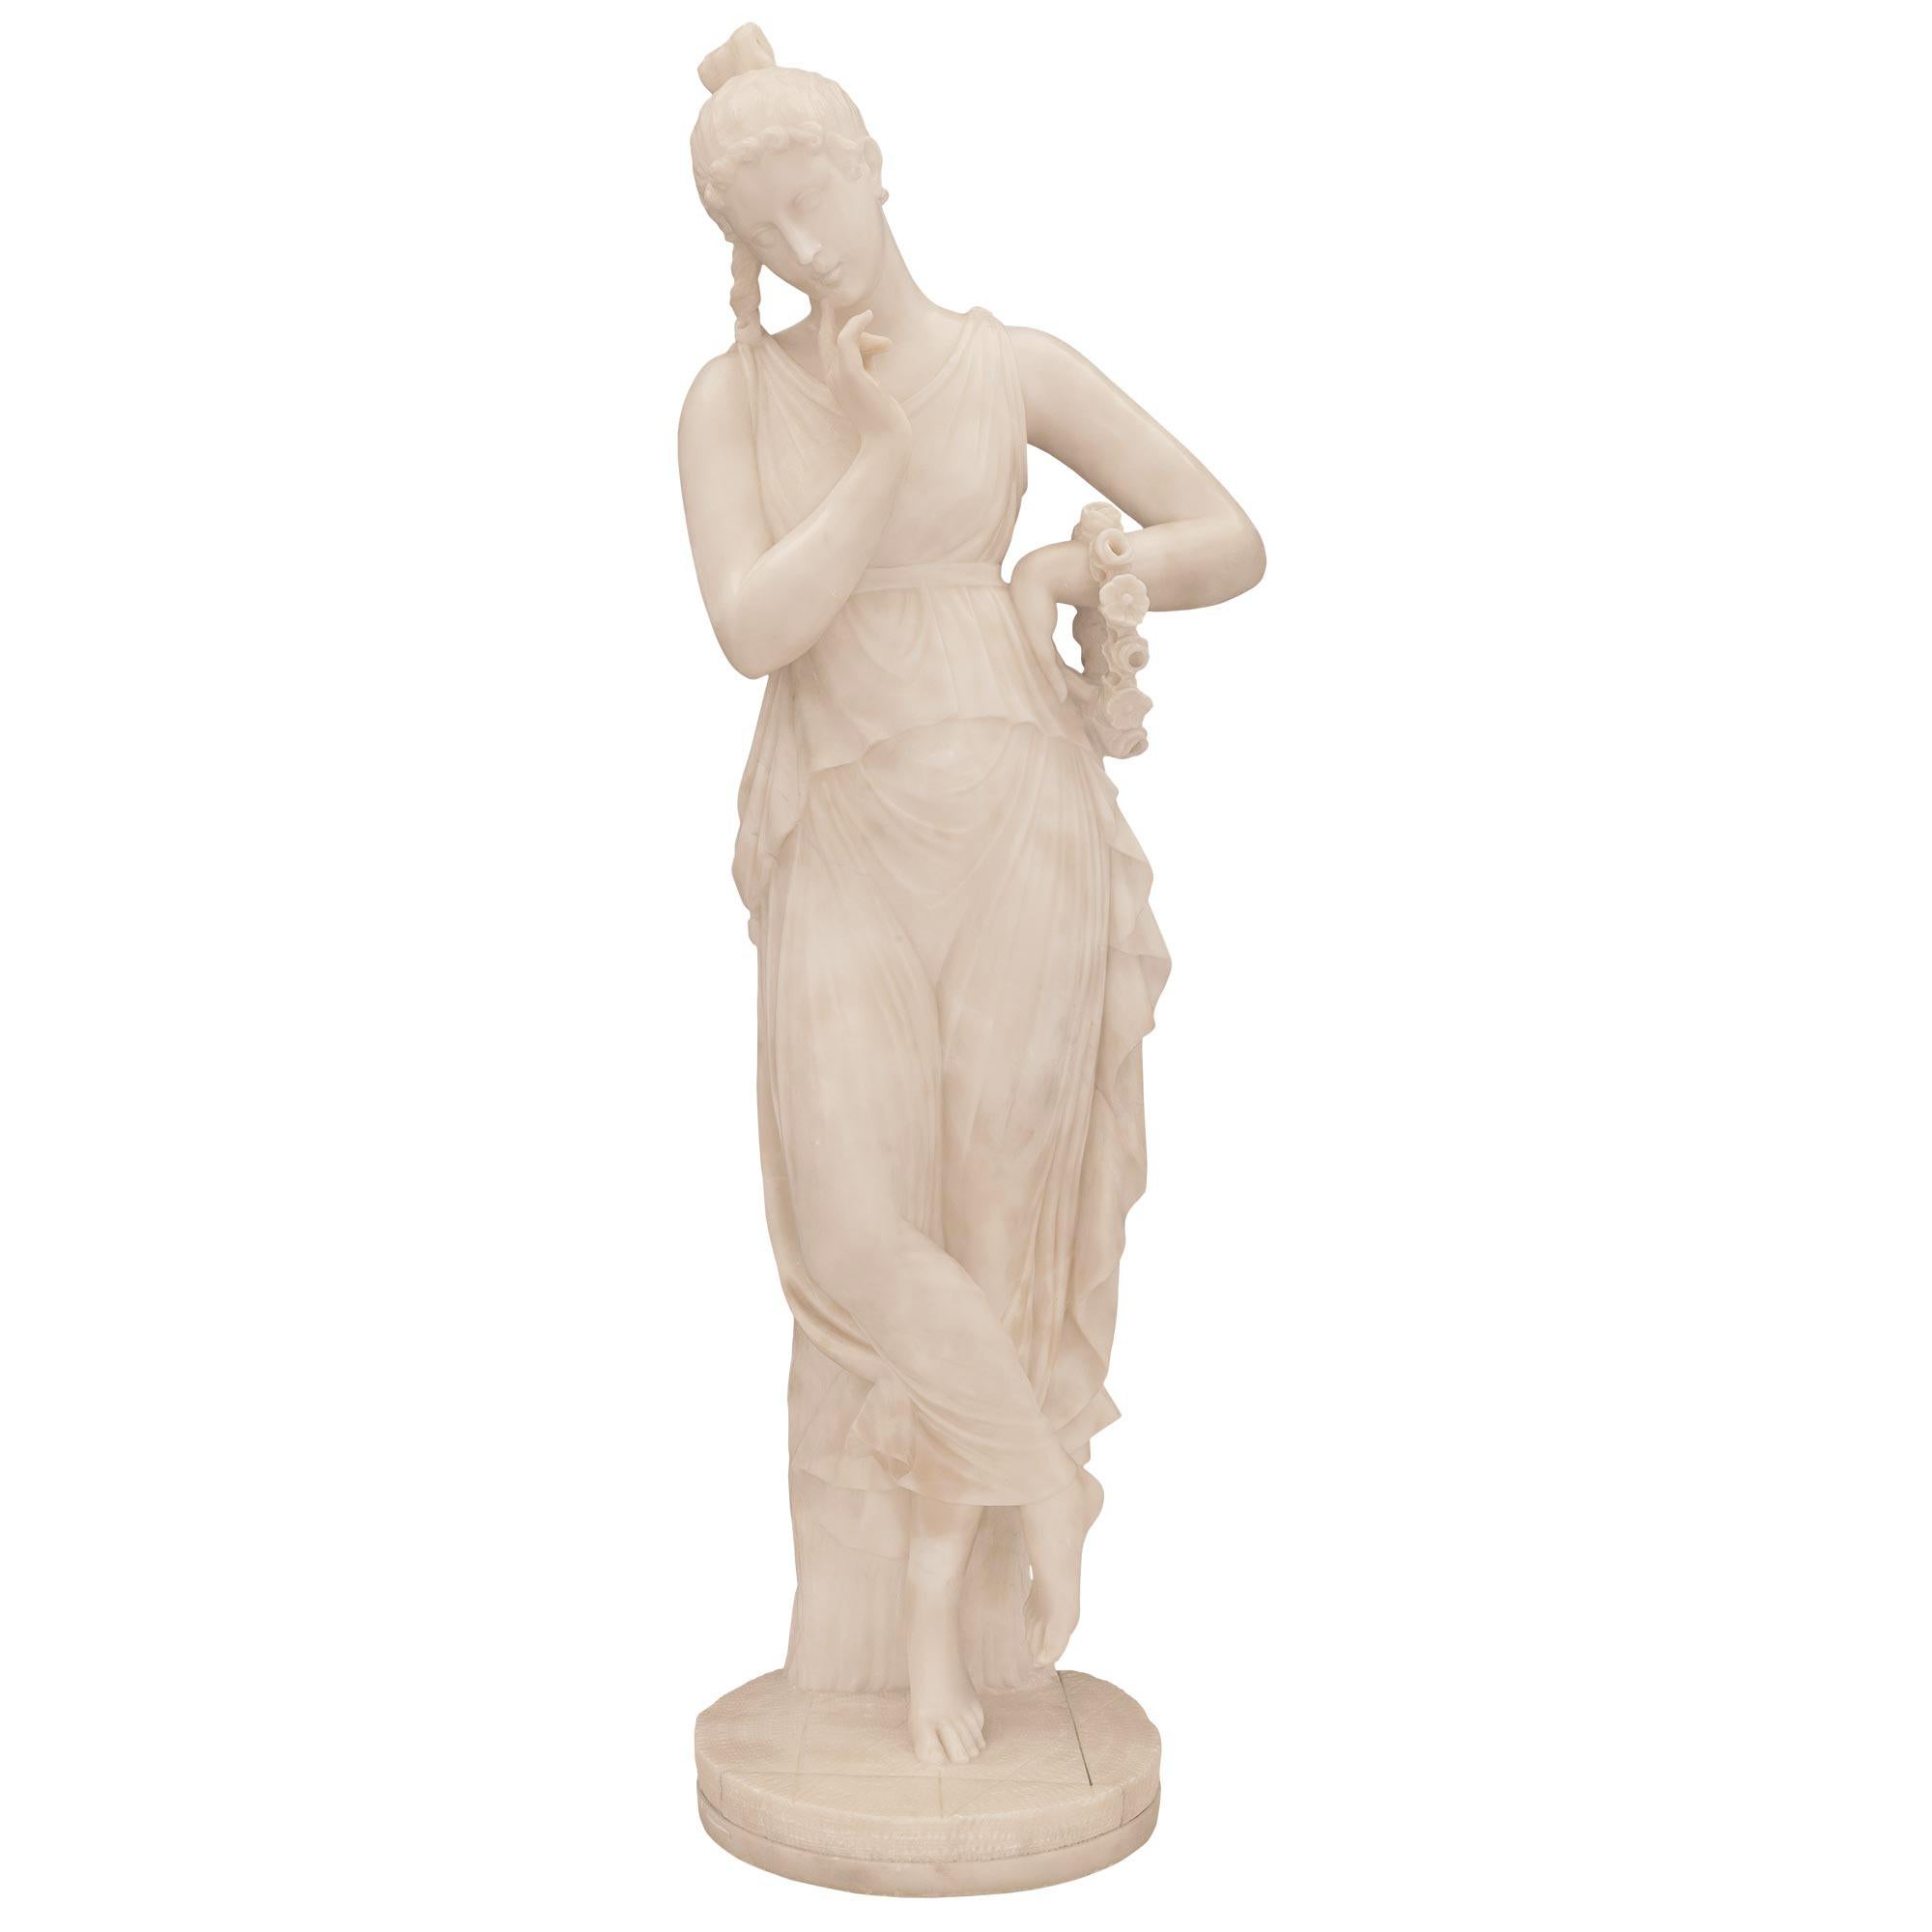 A striking Italian 19th century Alabaster statue of a beautiful maiden after a model by Antonio Canova. The statue is raised by a circular base with a most decorative ground like design where the wonderfully executed maiden is standing in front of a